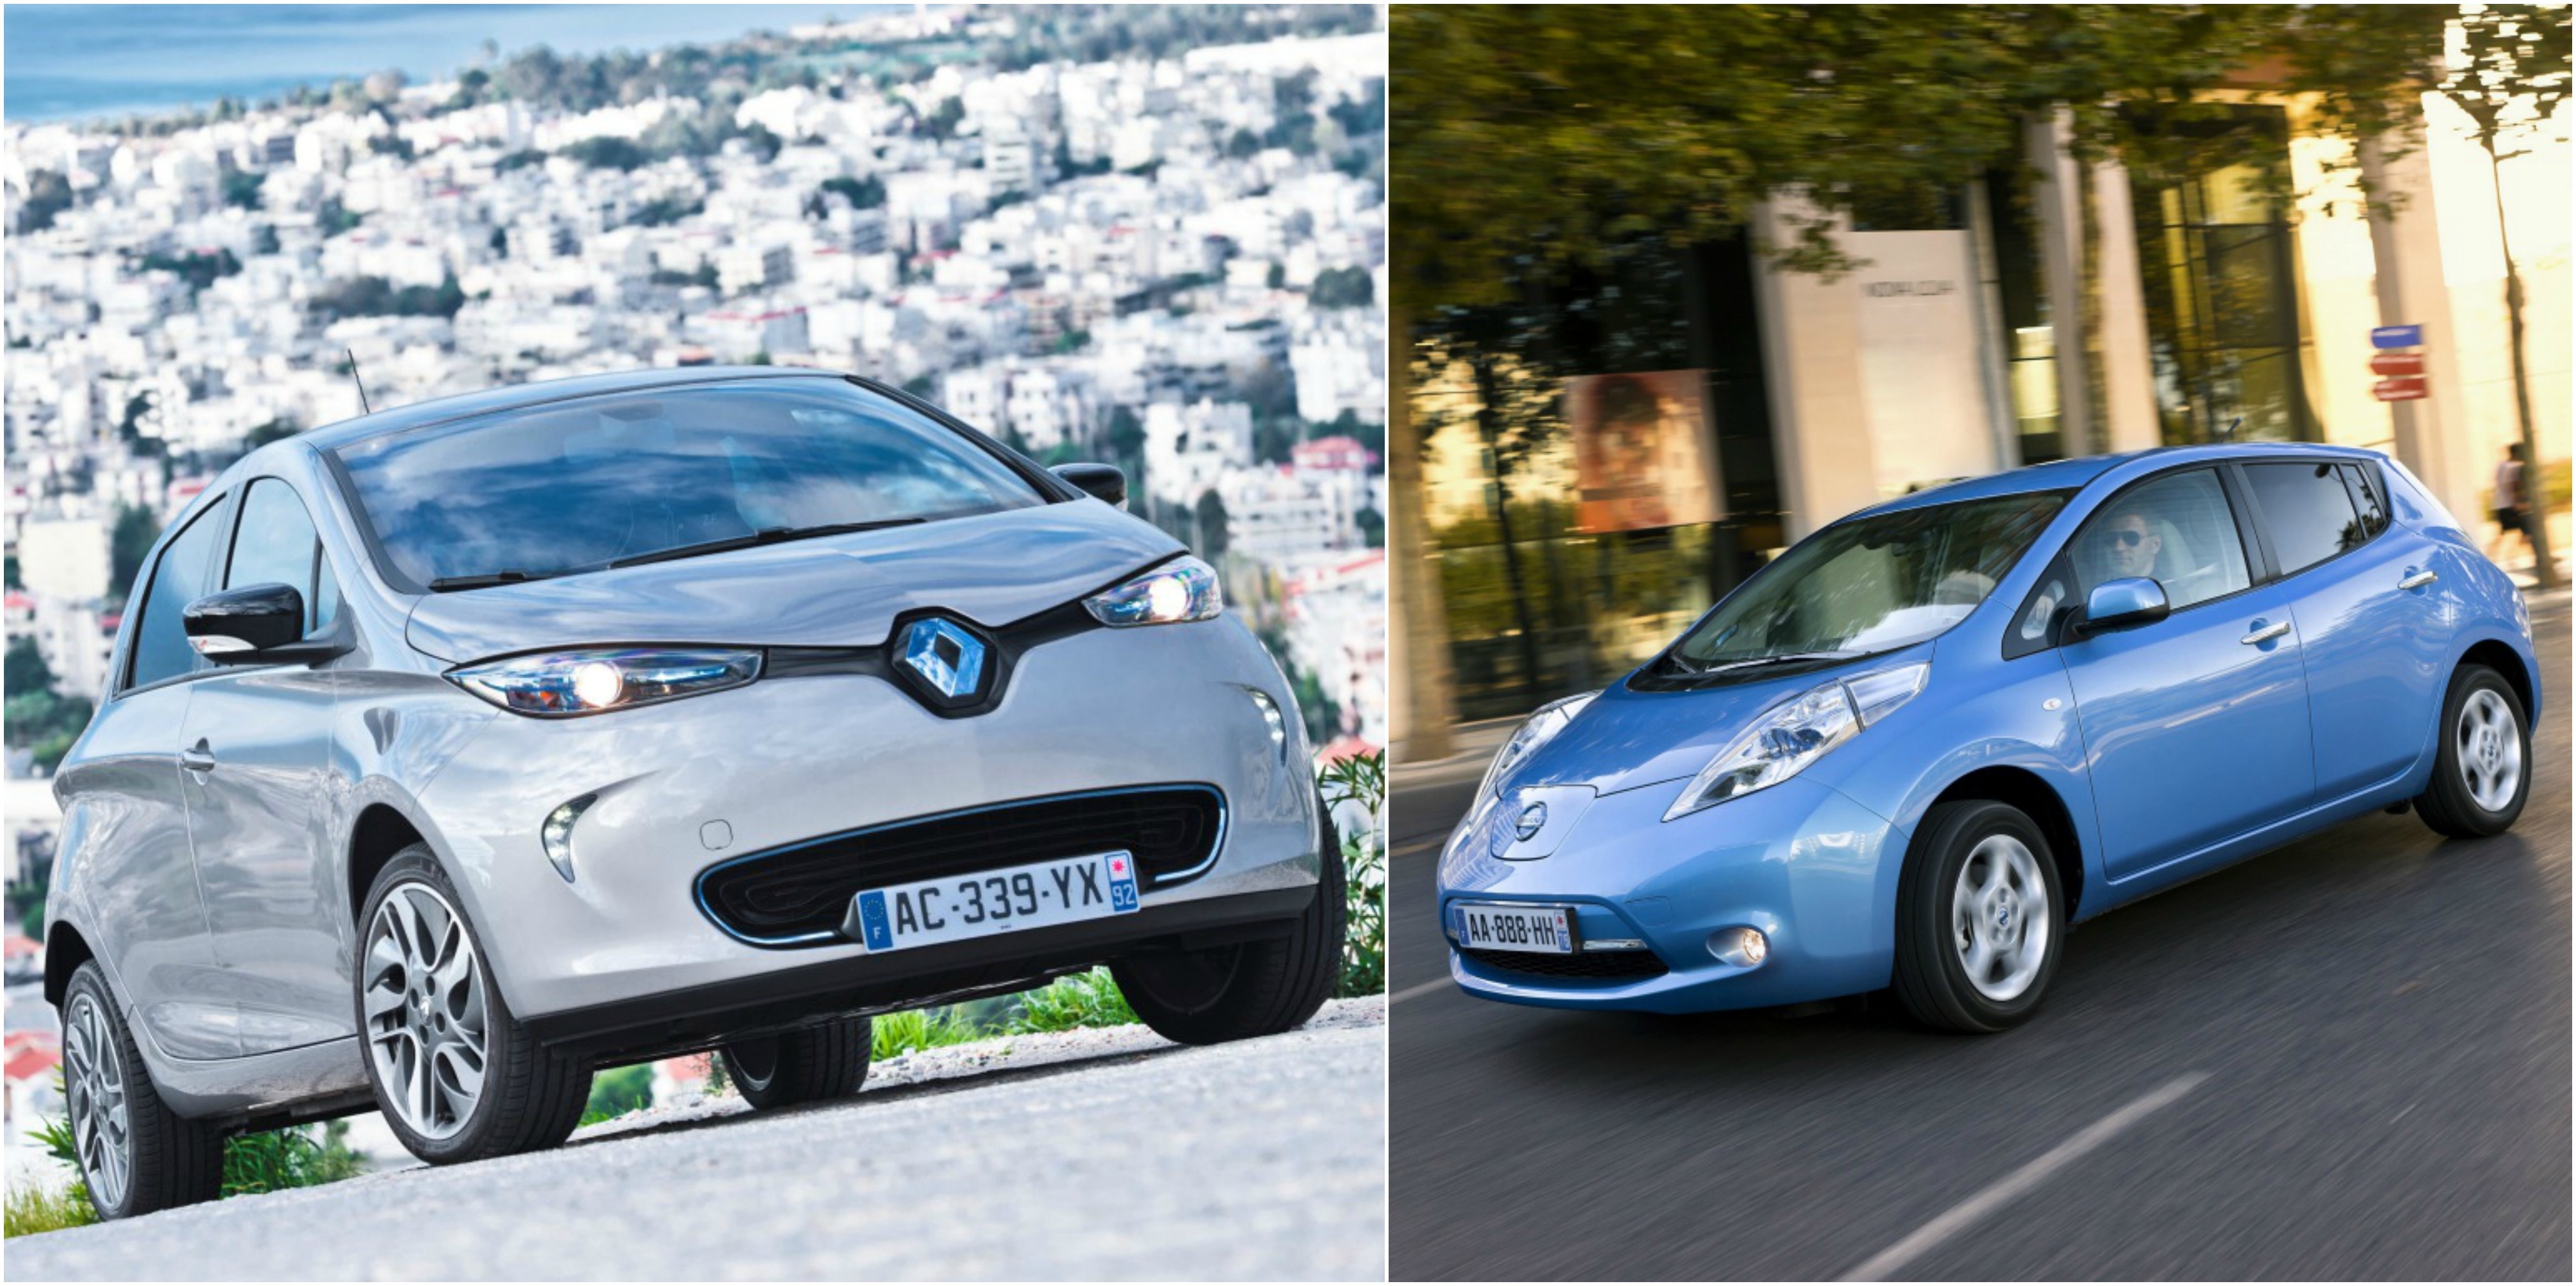 Renault & Nissan Celebrate 350,000 Electric Vehicles Sold All Around